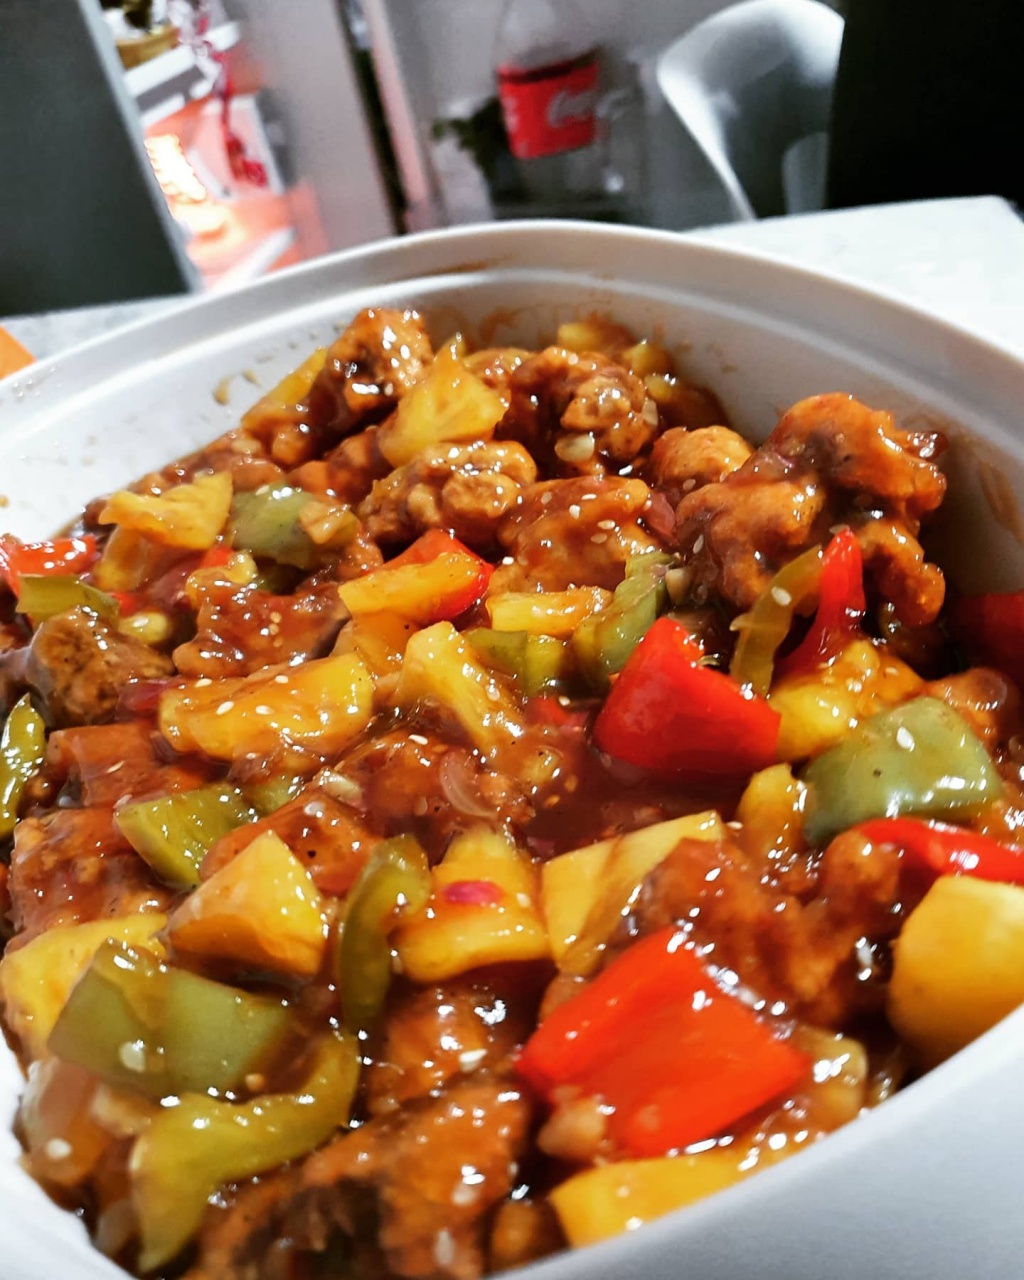 Chinese style of sweet and sour pork 🤣 happy eatin